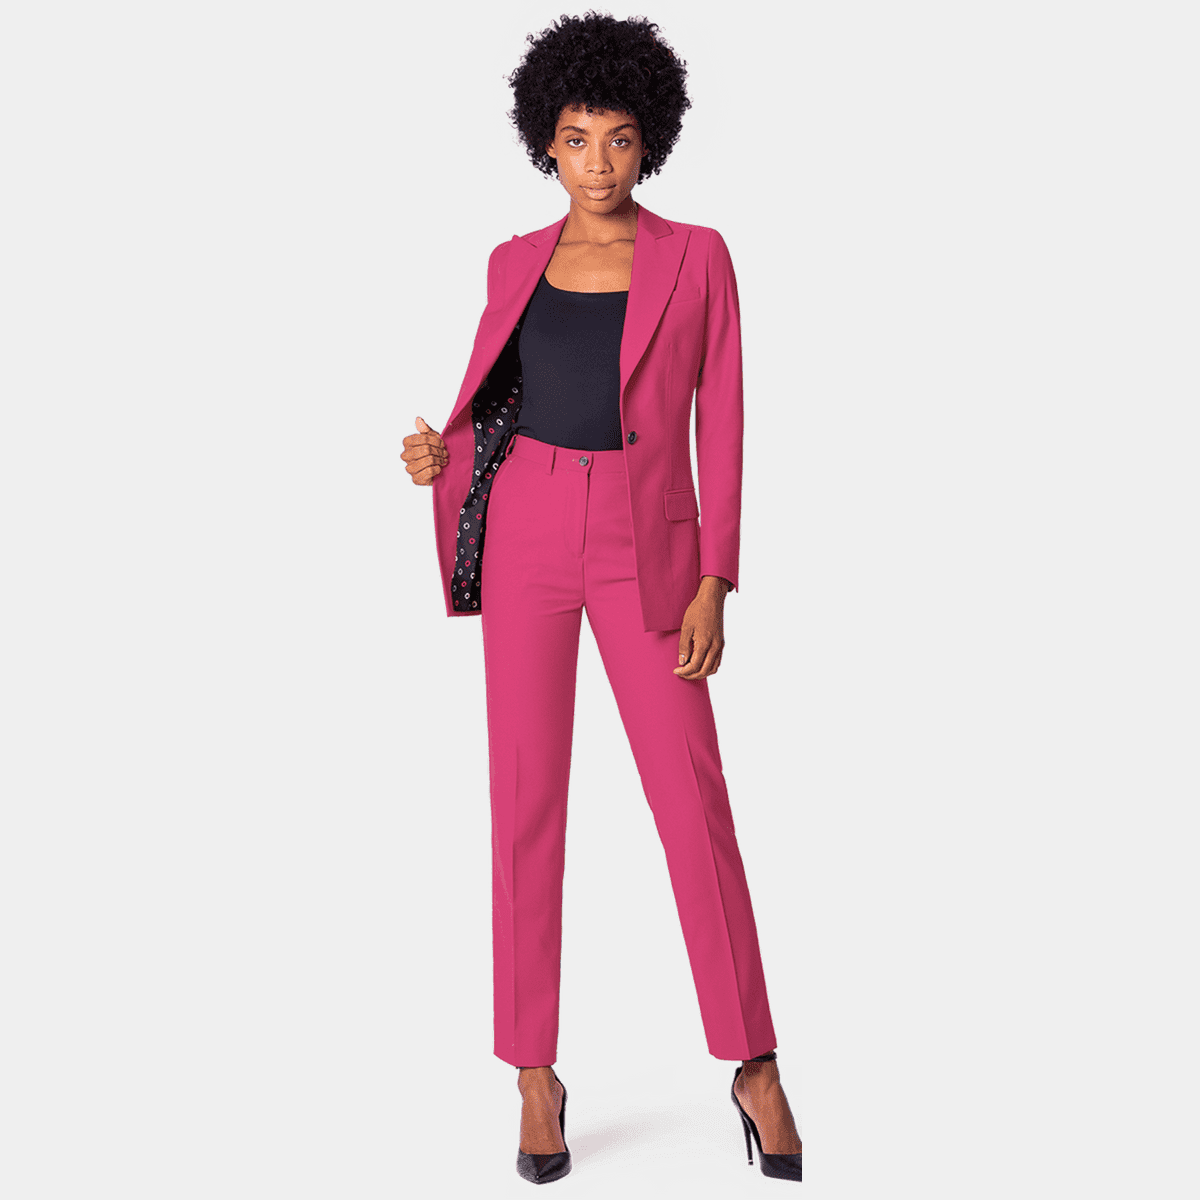 Pink Suit for Women/two Piece Suit/top/womens Suit/womens Suit Set/wedding  Suit/ Womens Coats Suit Set -  Canada